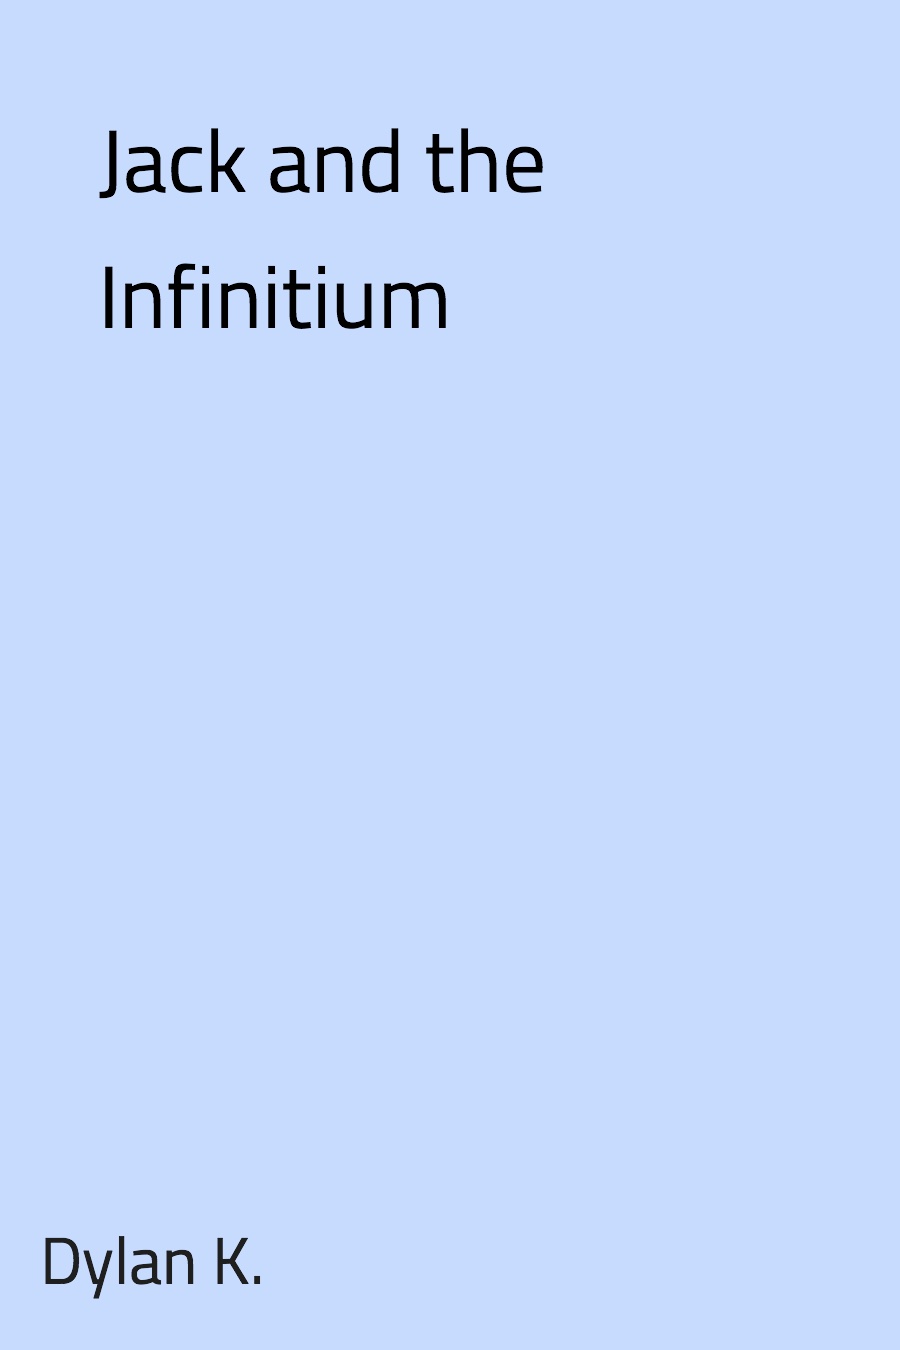 Jack and the Infinitium by Dylan K